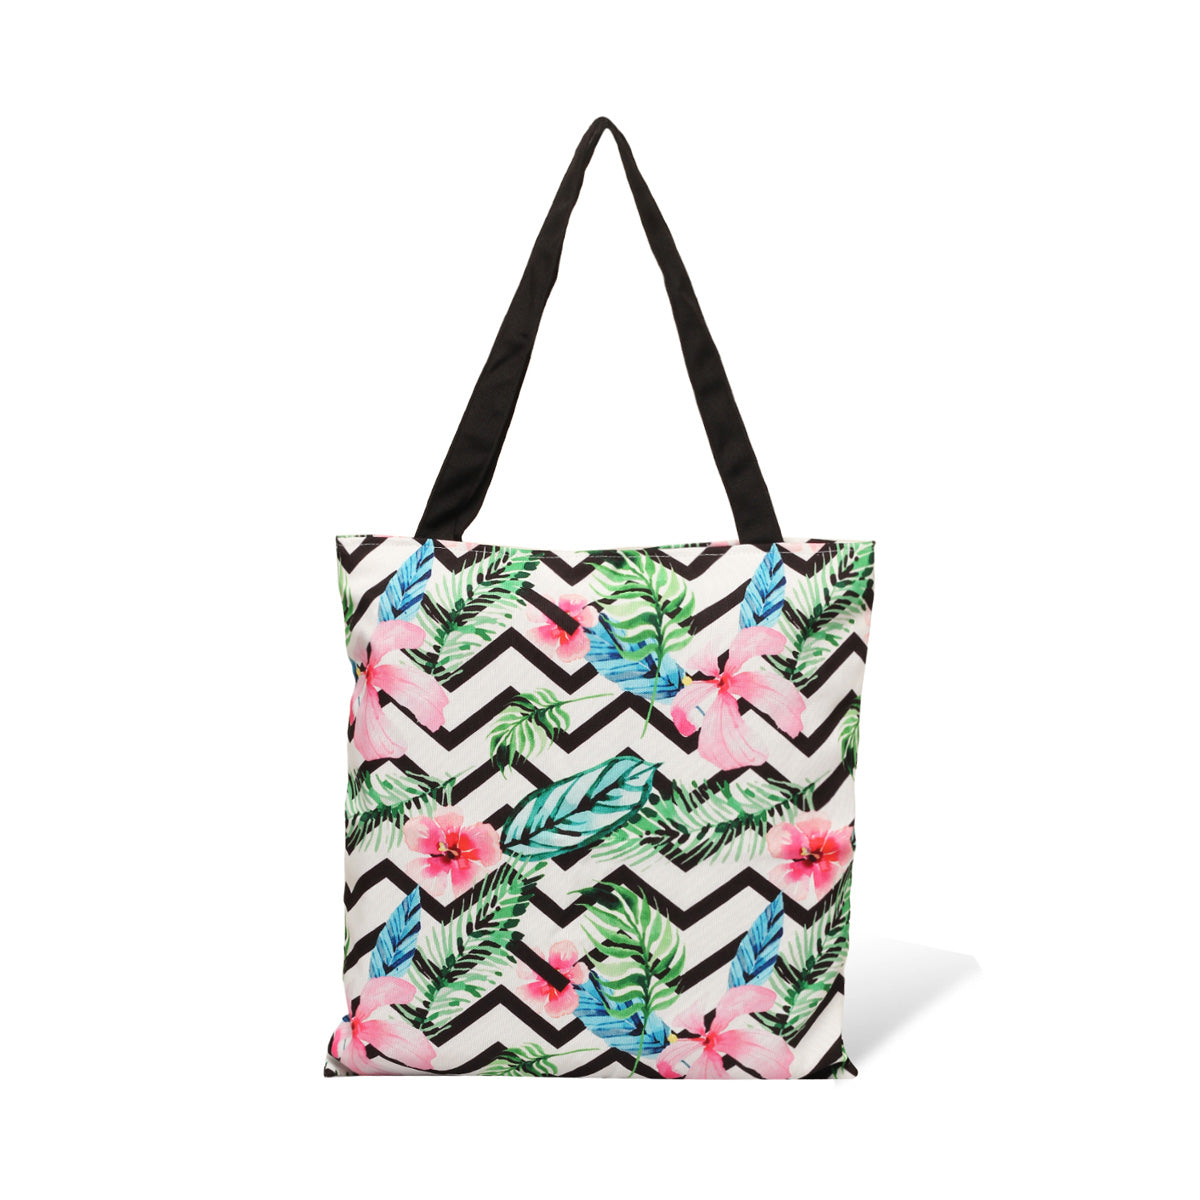 Tropical print tote bag with chic black handles.